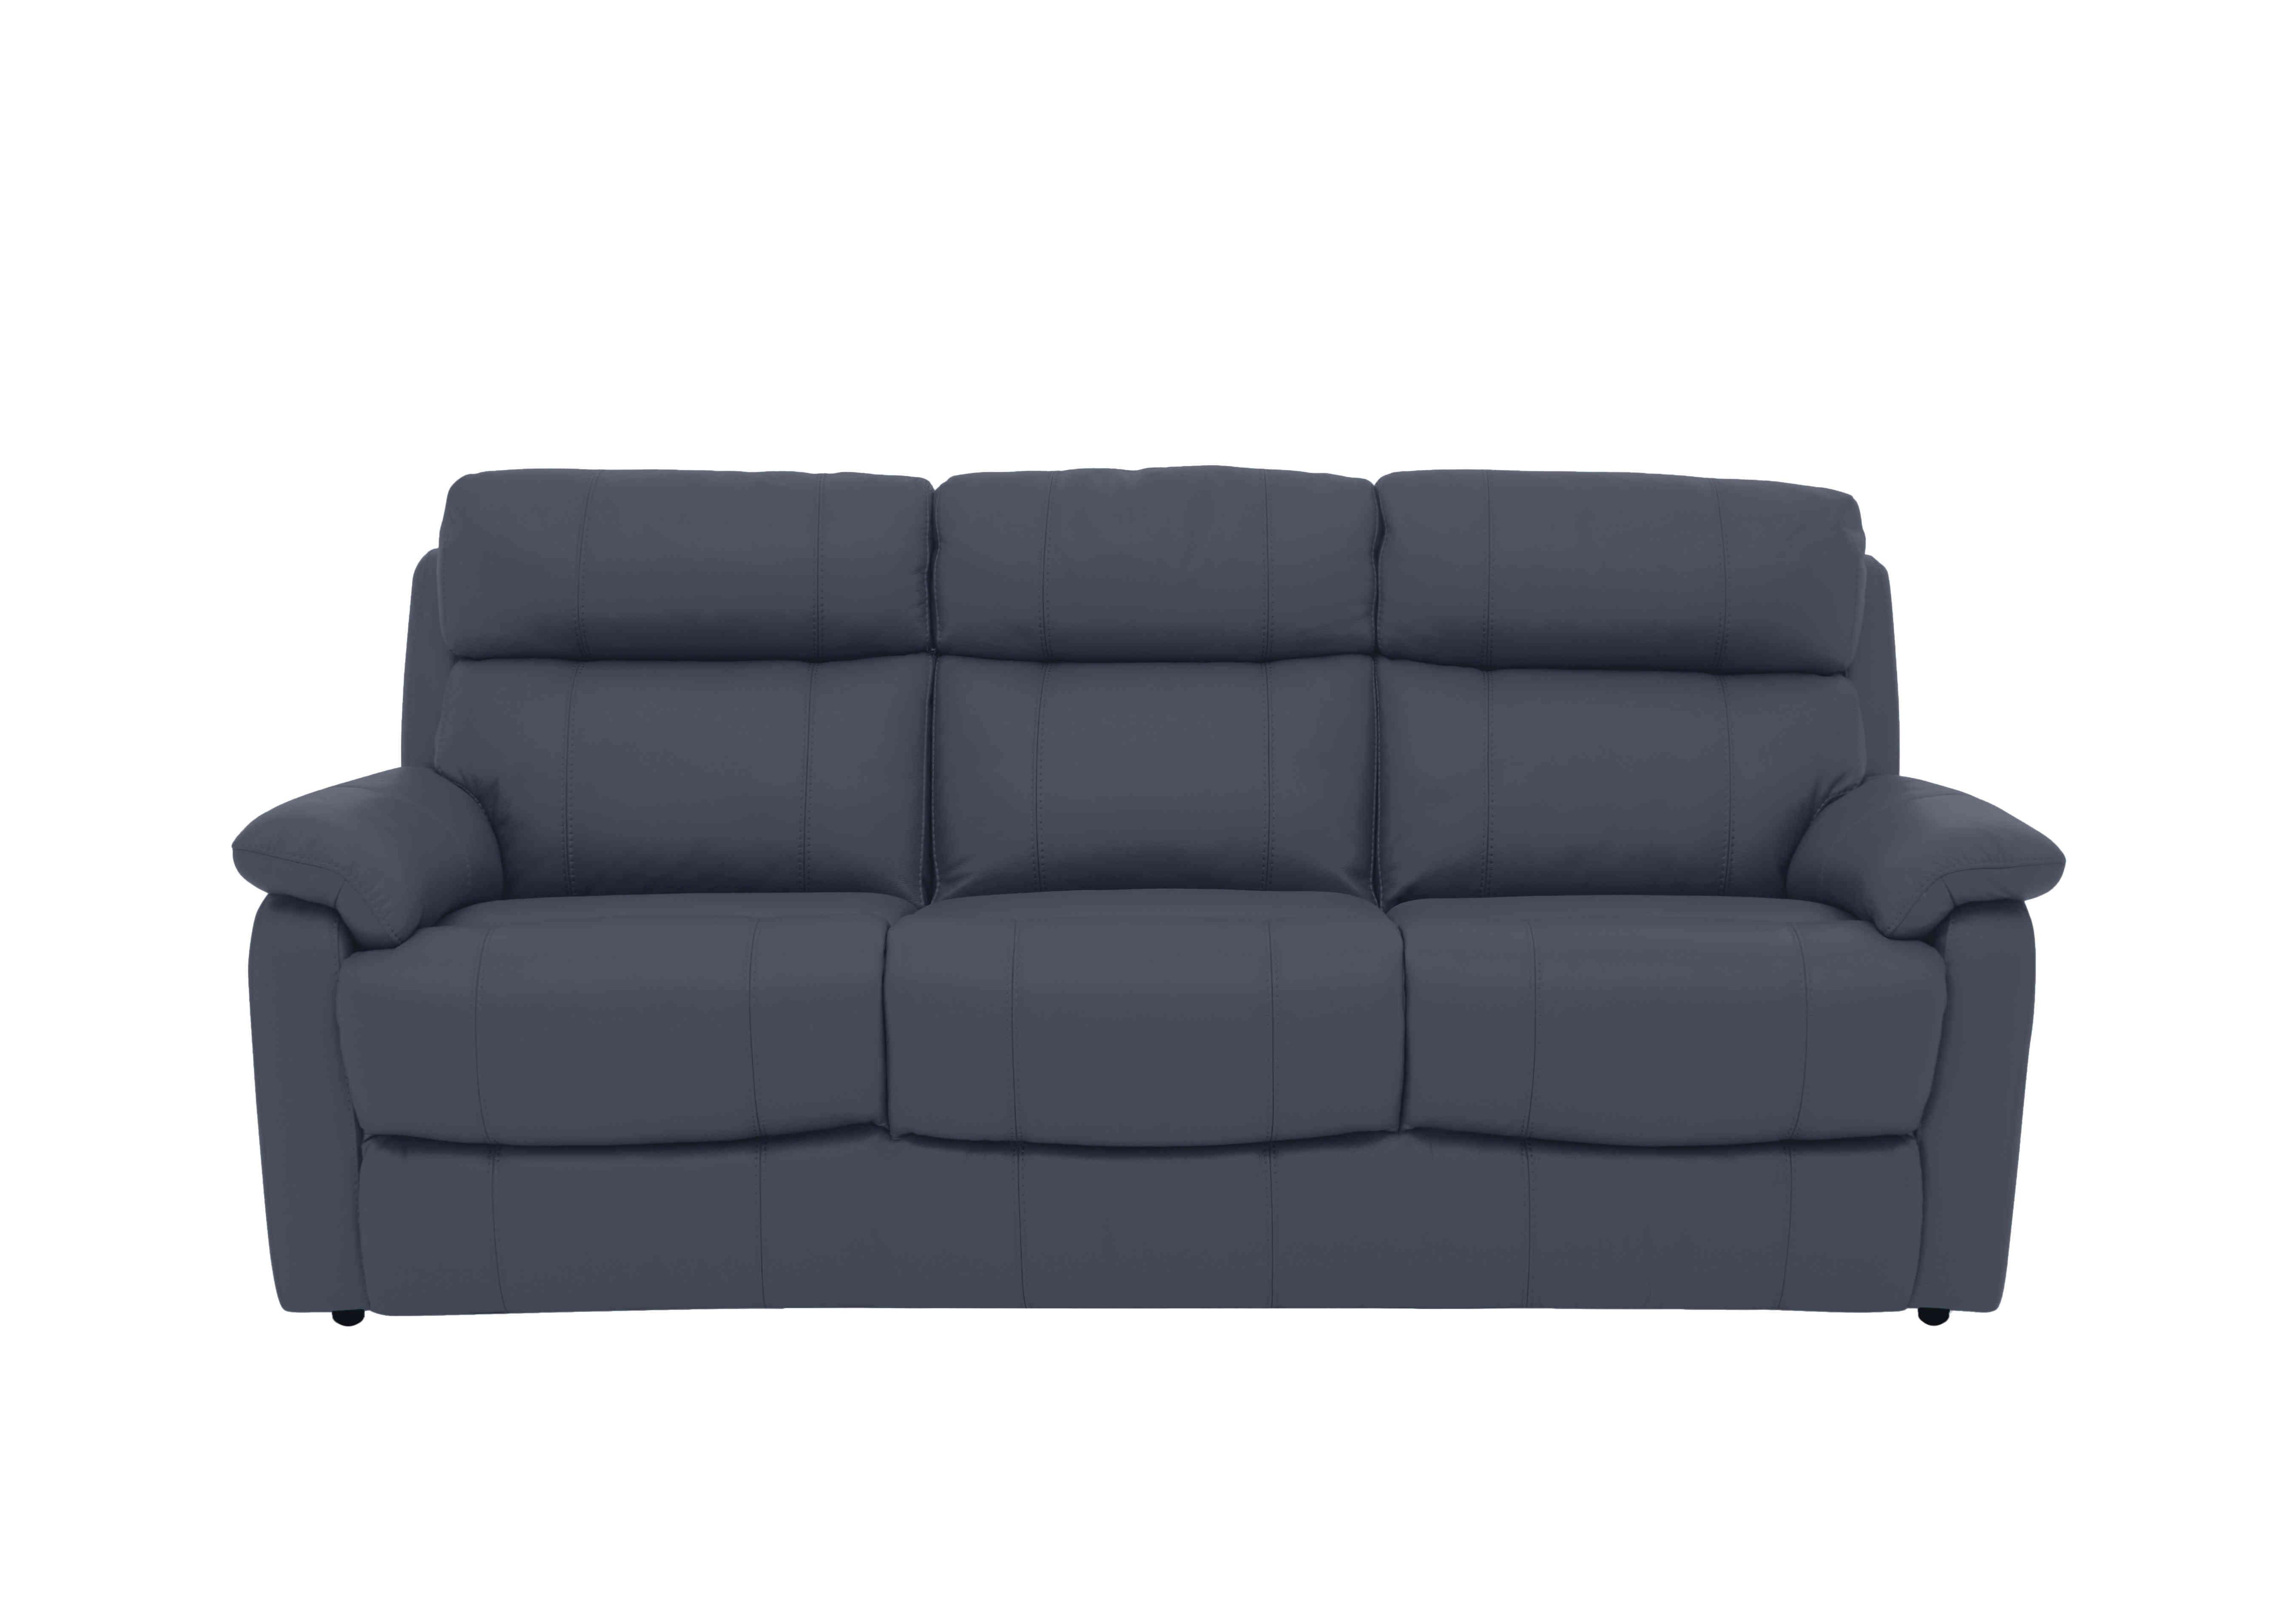 Relax Station Komodo 3 Seater Leather Sofa in Bv-313e Ocean Blue on Furniture Village